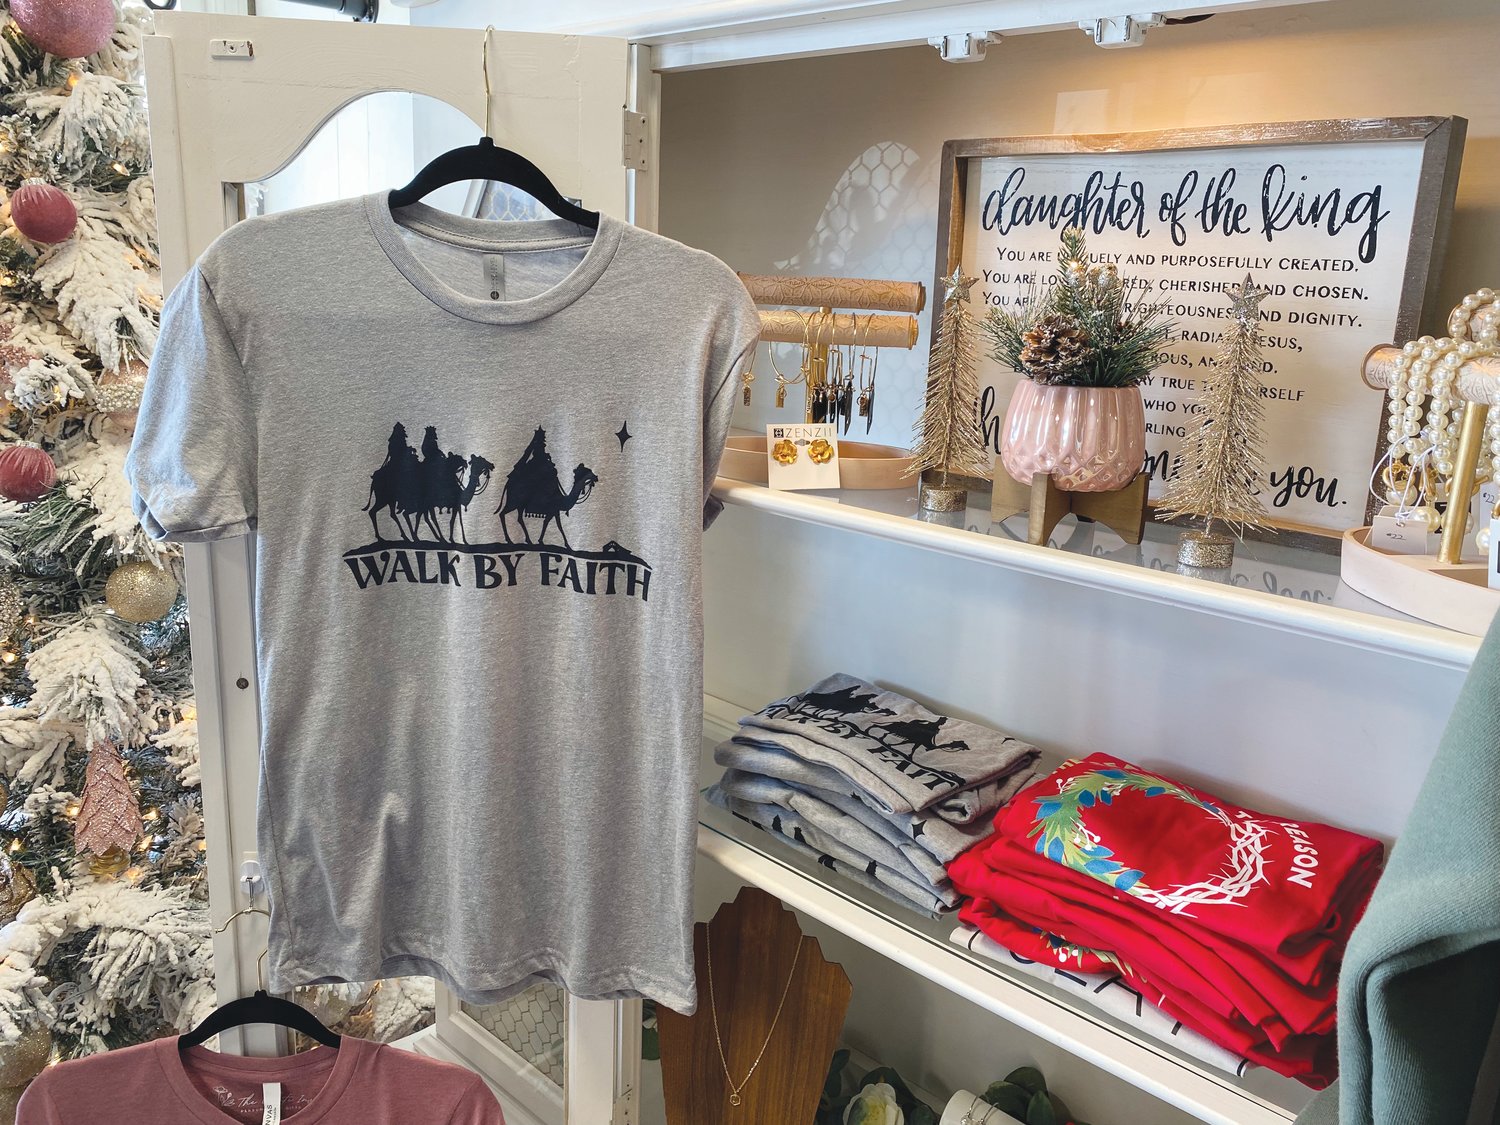 Faithfully Fruitful features women's clothing, accessories and jewelry and more. Some items are adorned with scripture or Biblical themes.